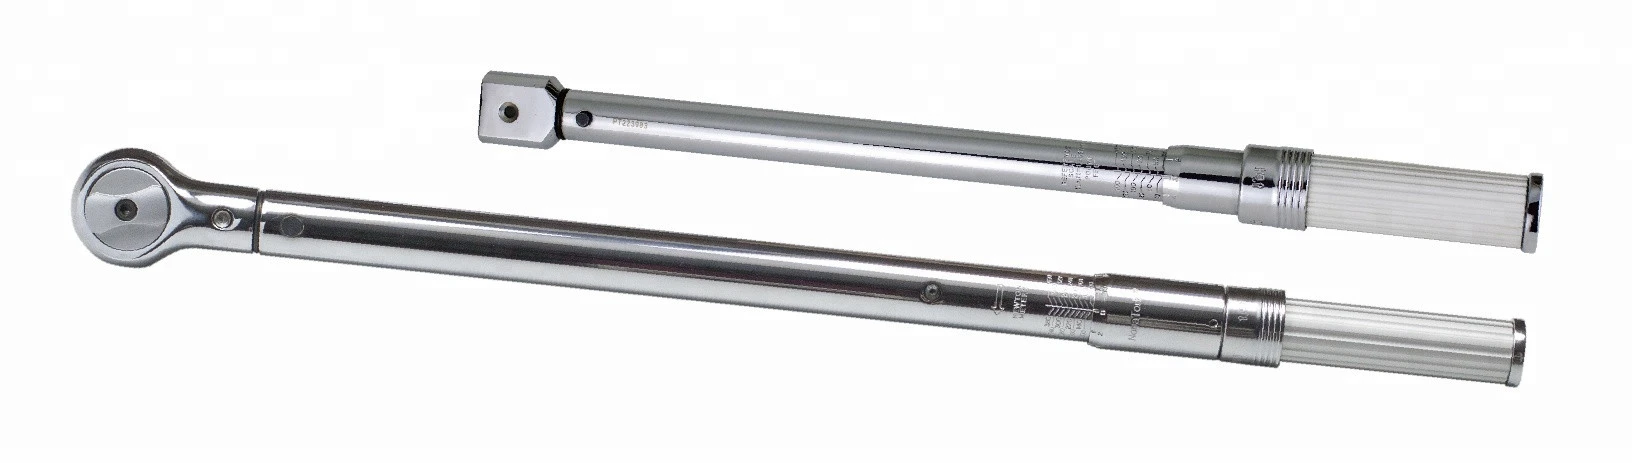 12mm Round Drive Torque Wrench